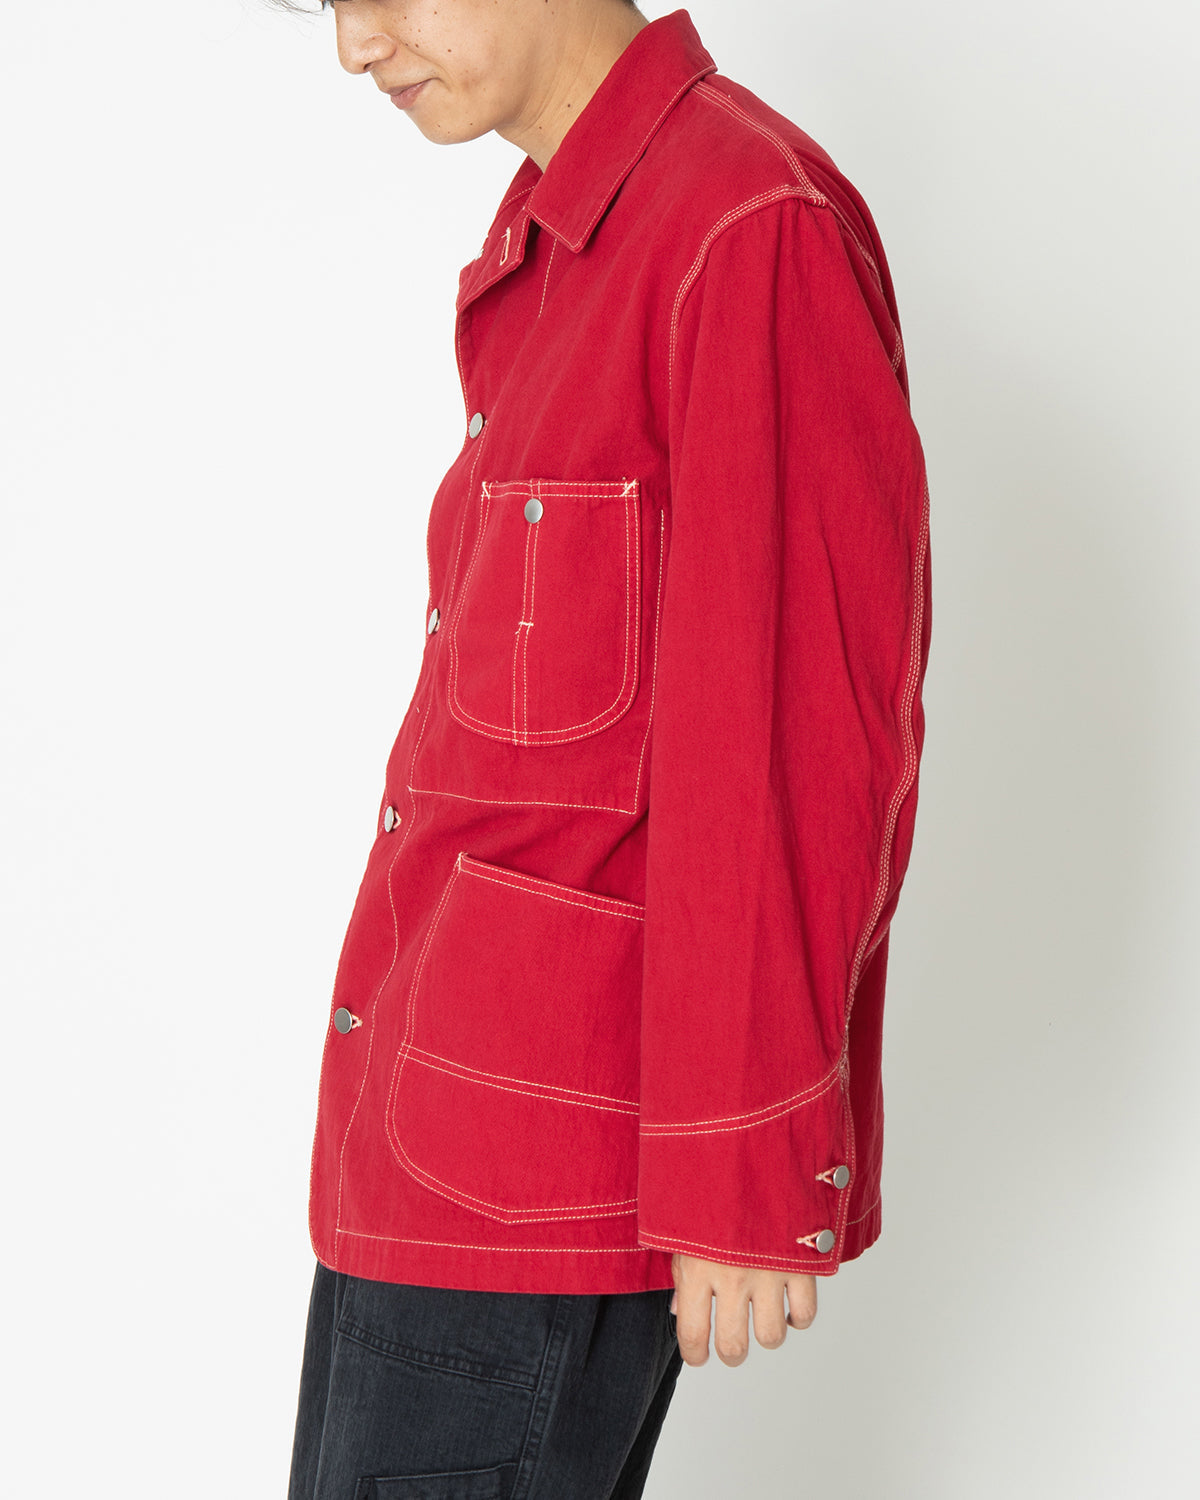 A.PRESSE Coverall Jacket-Red size3